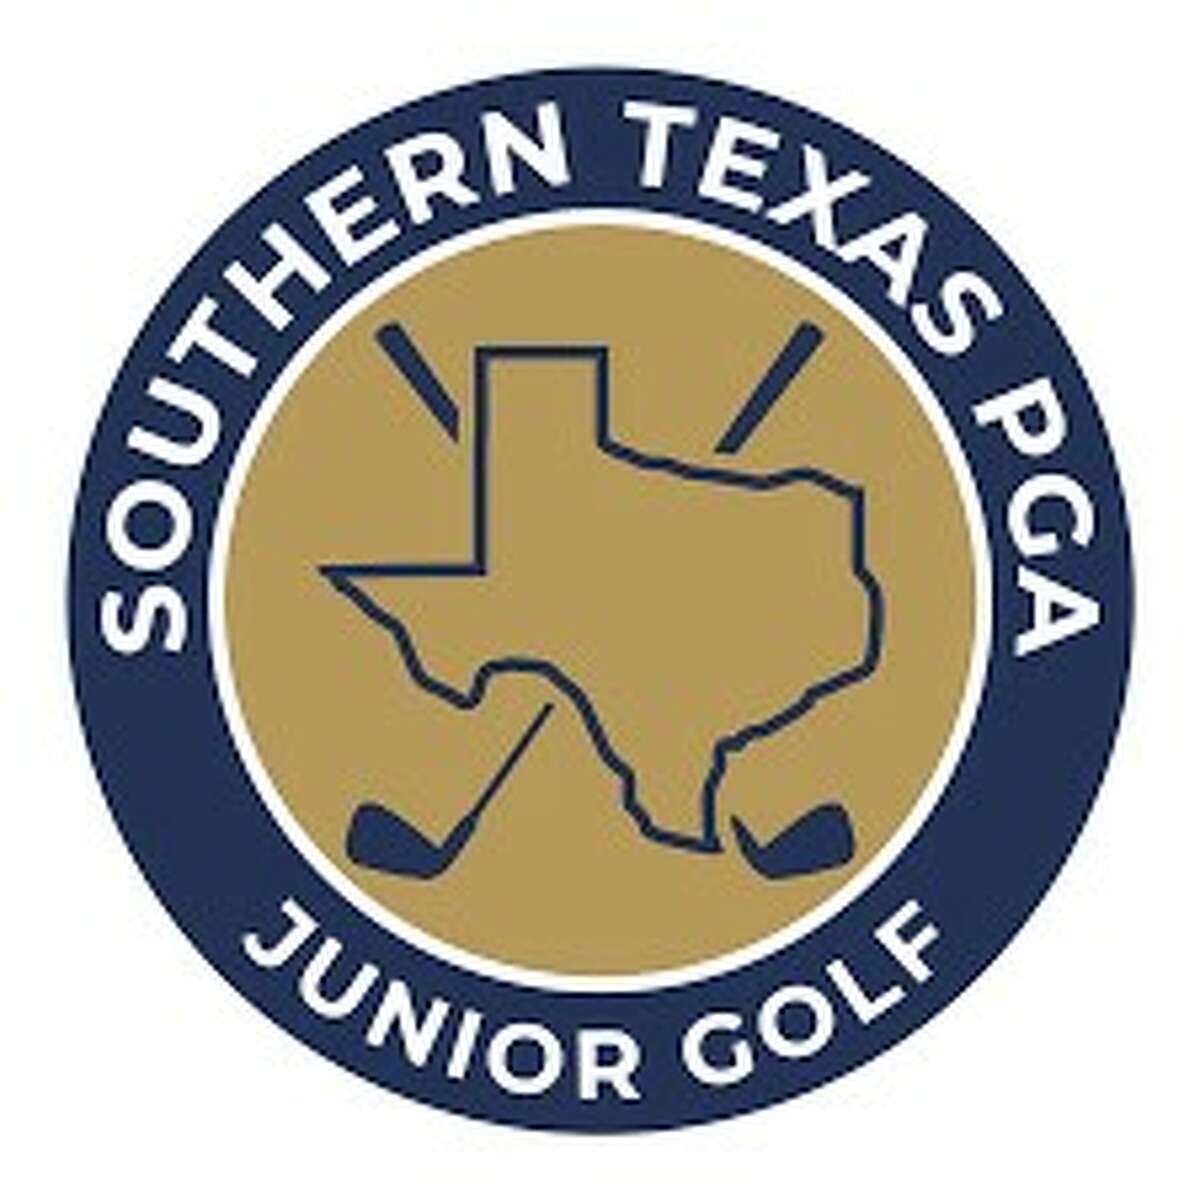 The Southern Texas PGA is one of 41 PGA of America Sections in the country and serves over 800 PGA Members and Associates that work within the industry each day. 